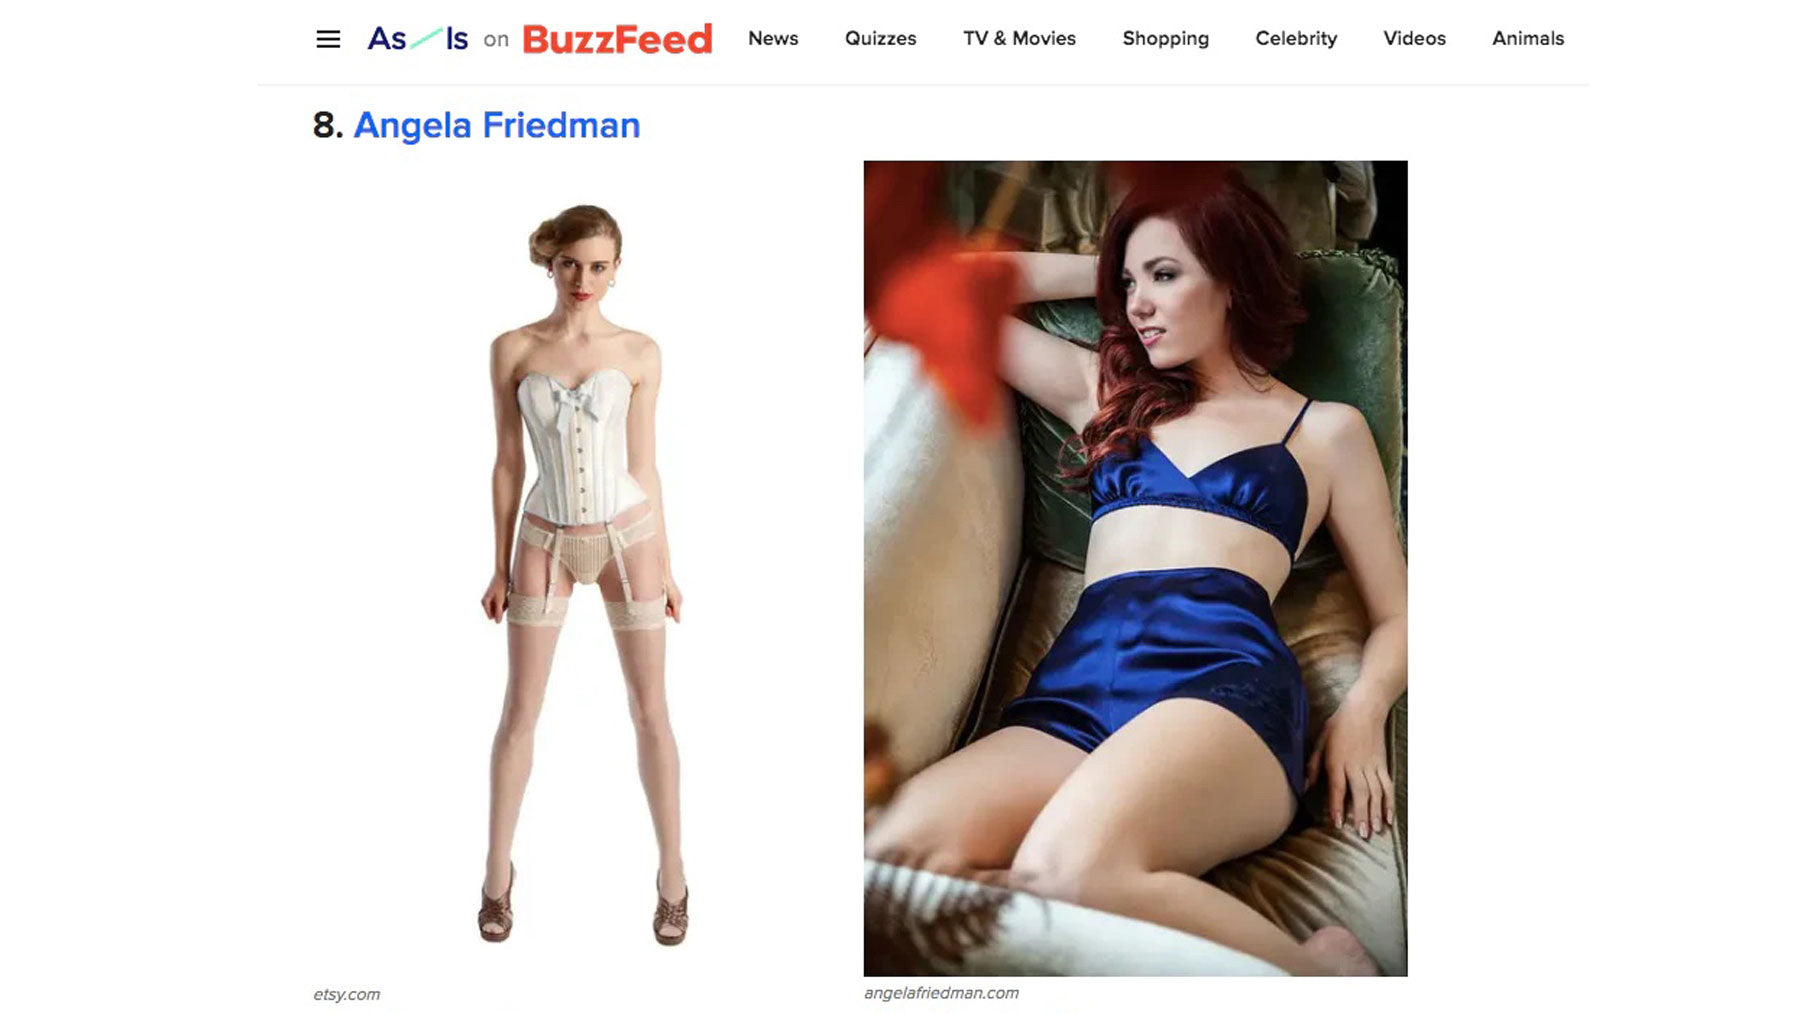 Vintage and retro lingerie shopping guide on Buzzfeed